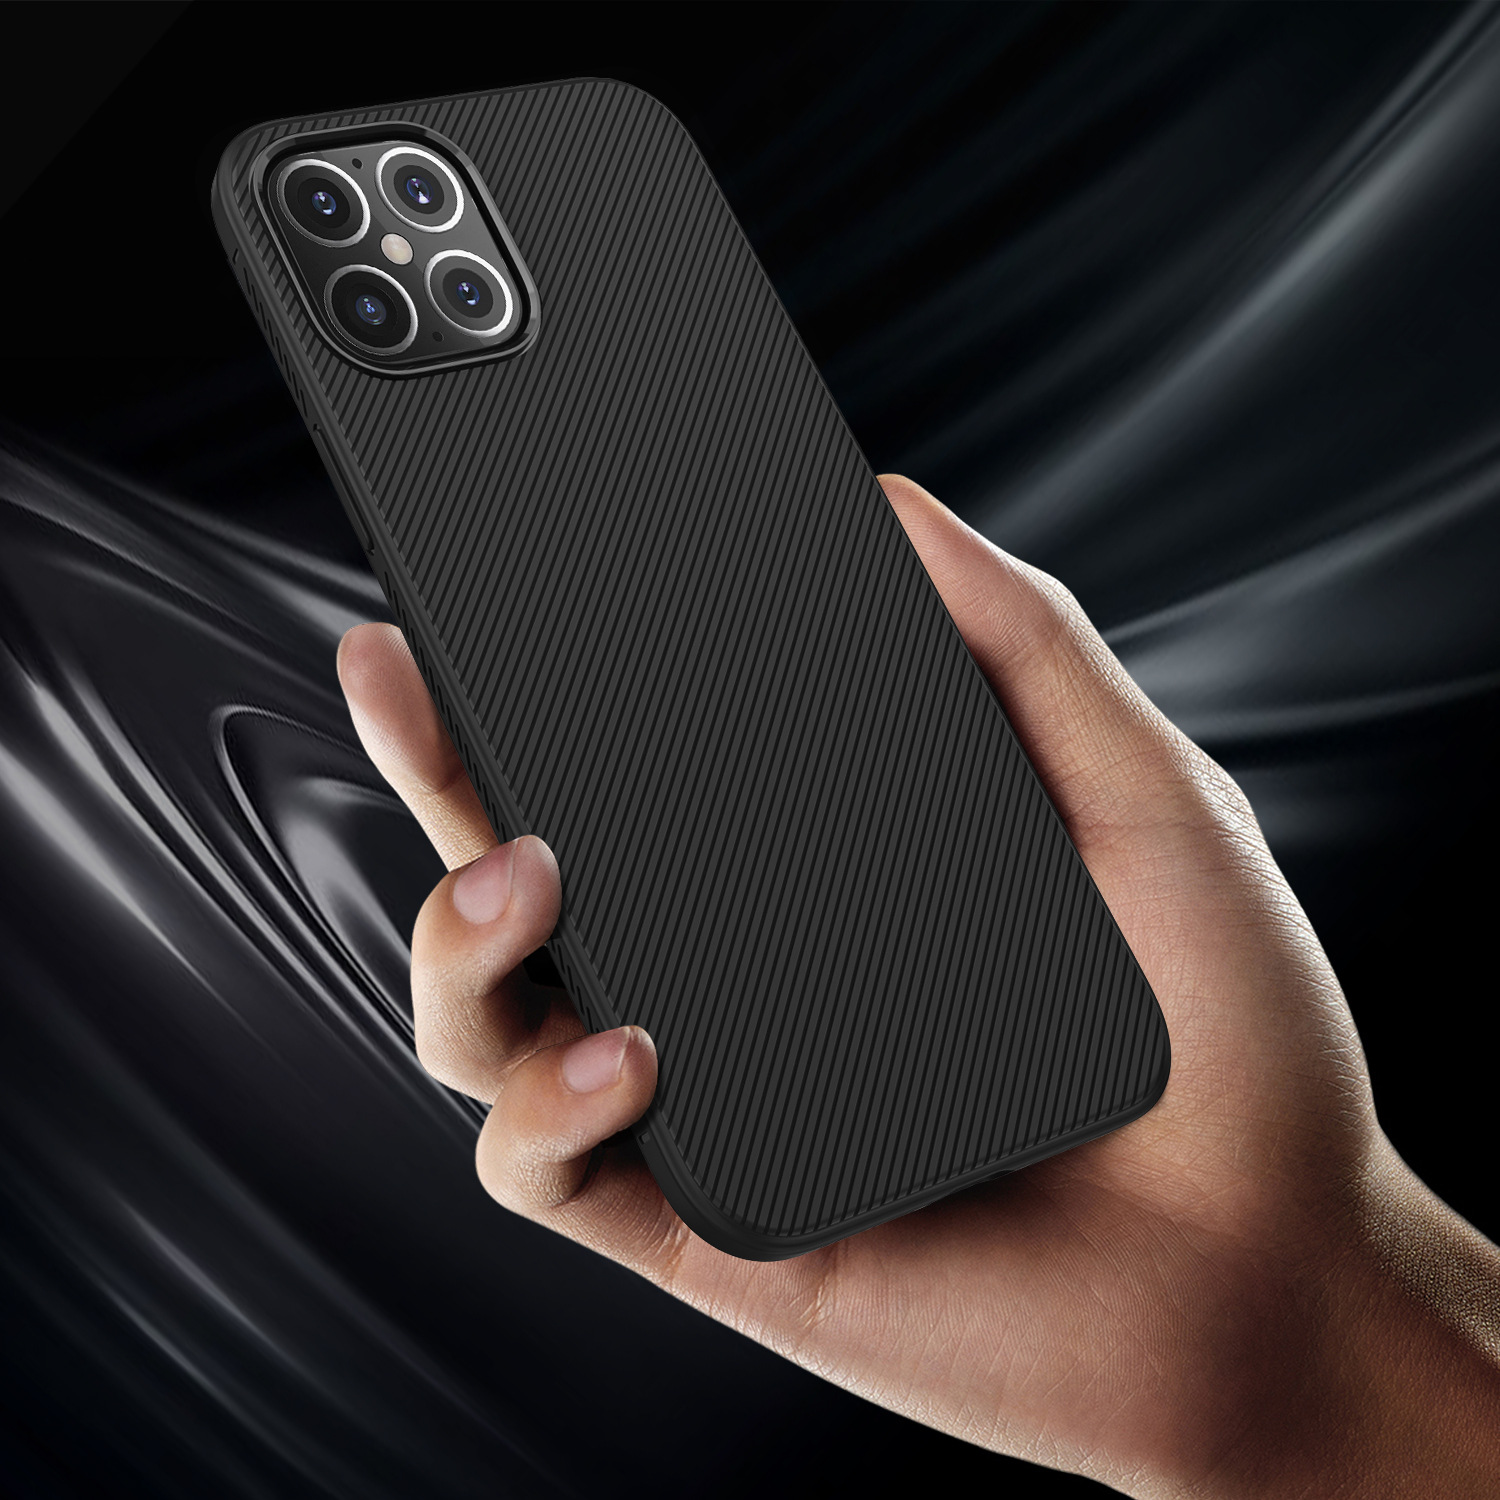 Bakeey-for-iPhone-1212-Pro-61-inch-Case-Carbon-Fiber-Texture-Slim-Soft-Silicone-Shockproof-Protectiv-1761525-3